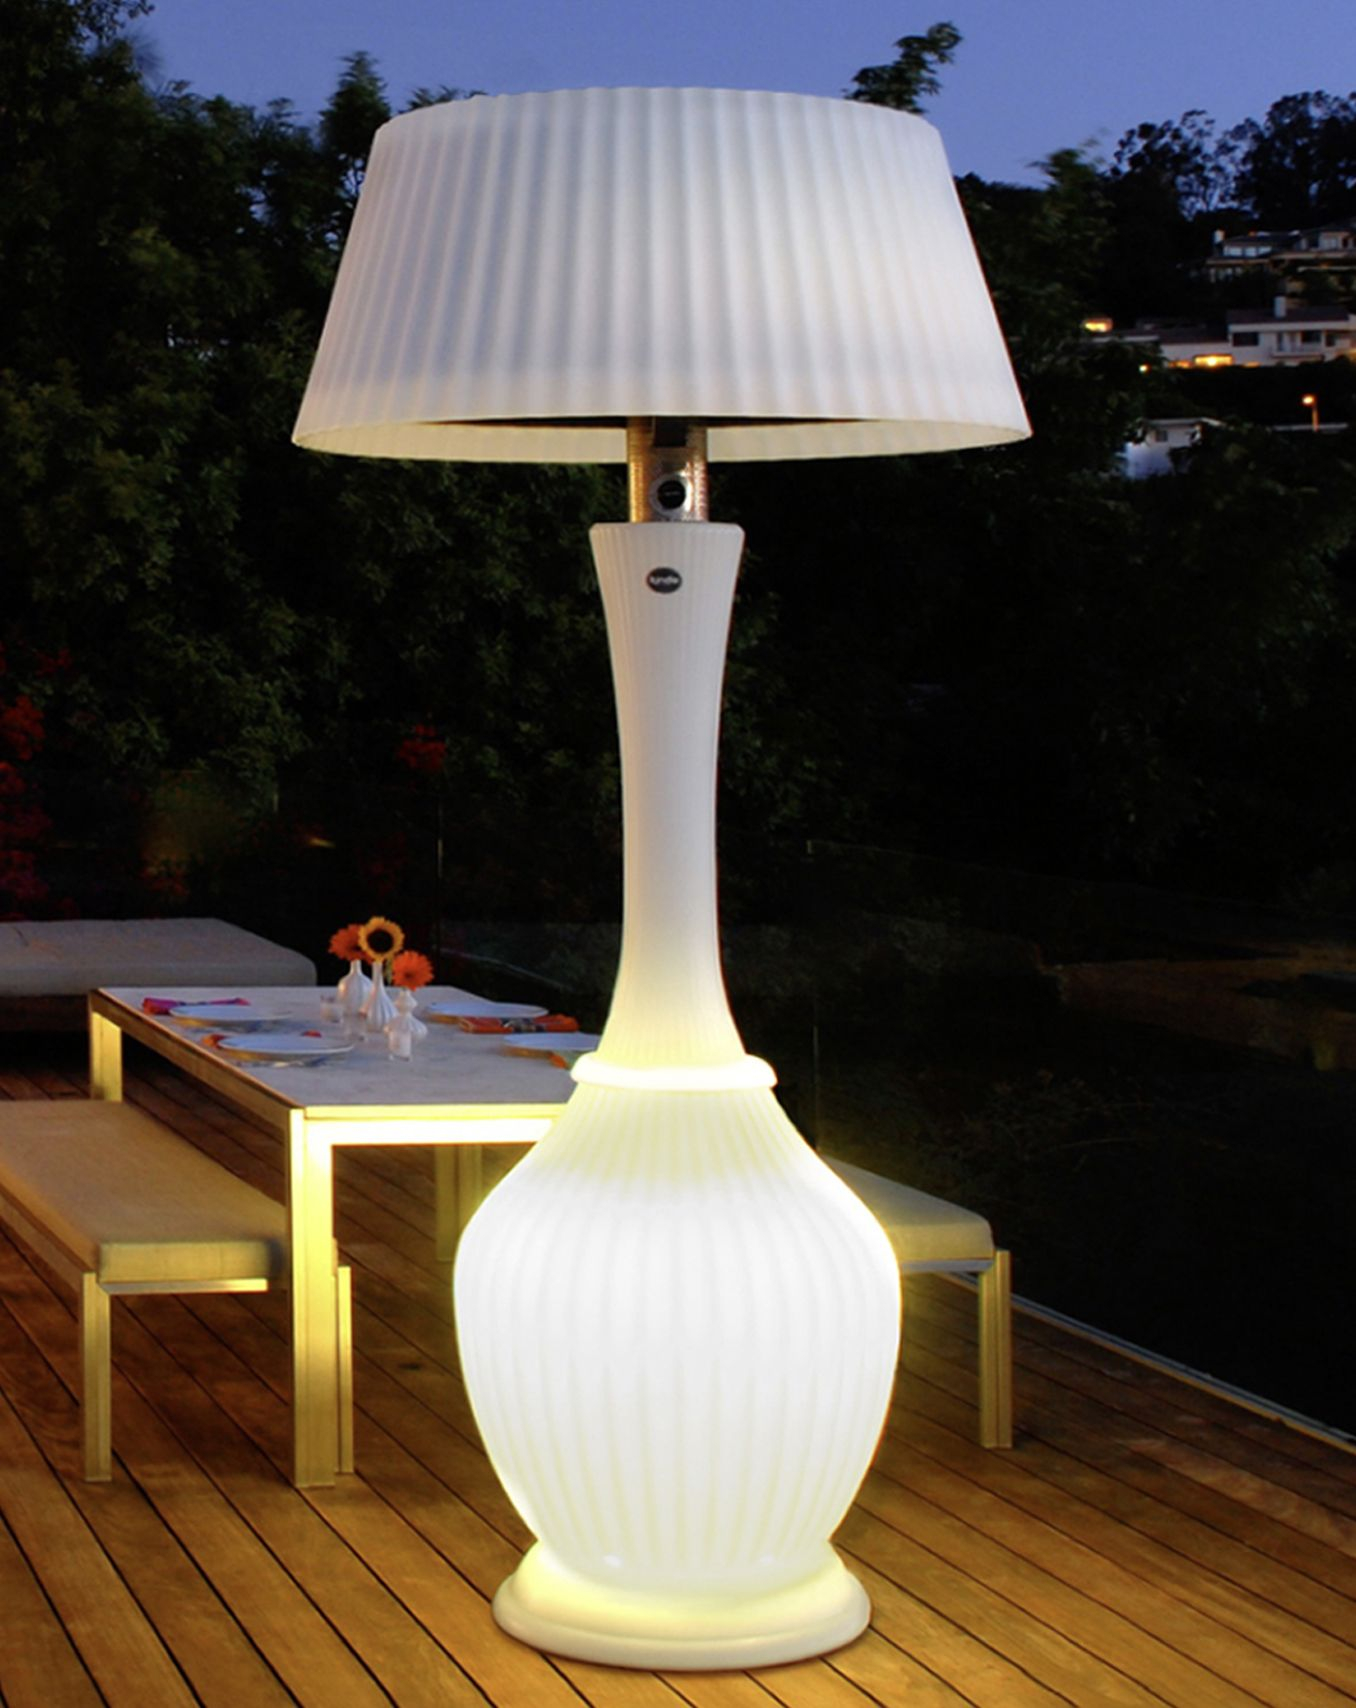 Kindle Living Lumen Lamp Casting A Warm Glow Upon The Deck intended for size 1356 X 1708